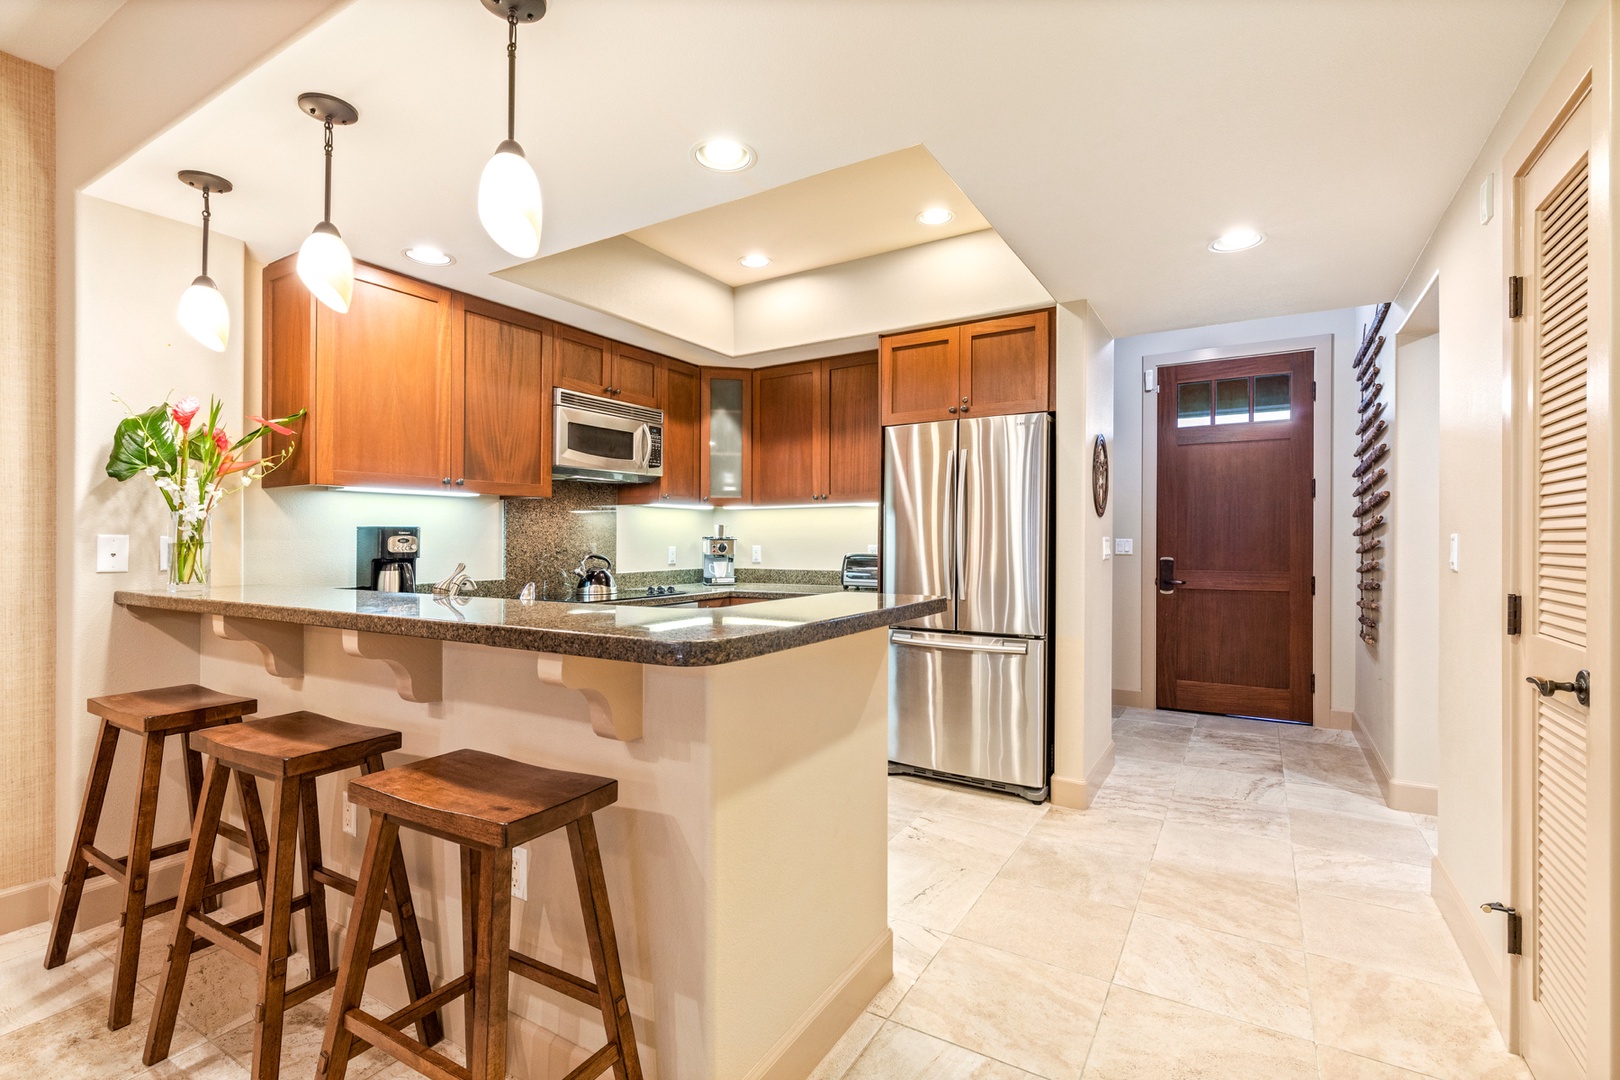 Waikoloa Vacation Rentals, 2BD Hali'i Kai (12C) at Waikoloa Resort - Wide view of open concept gourmet kitchen with granite countertops, stainless steel appliances and bar seating.